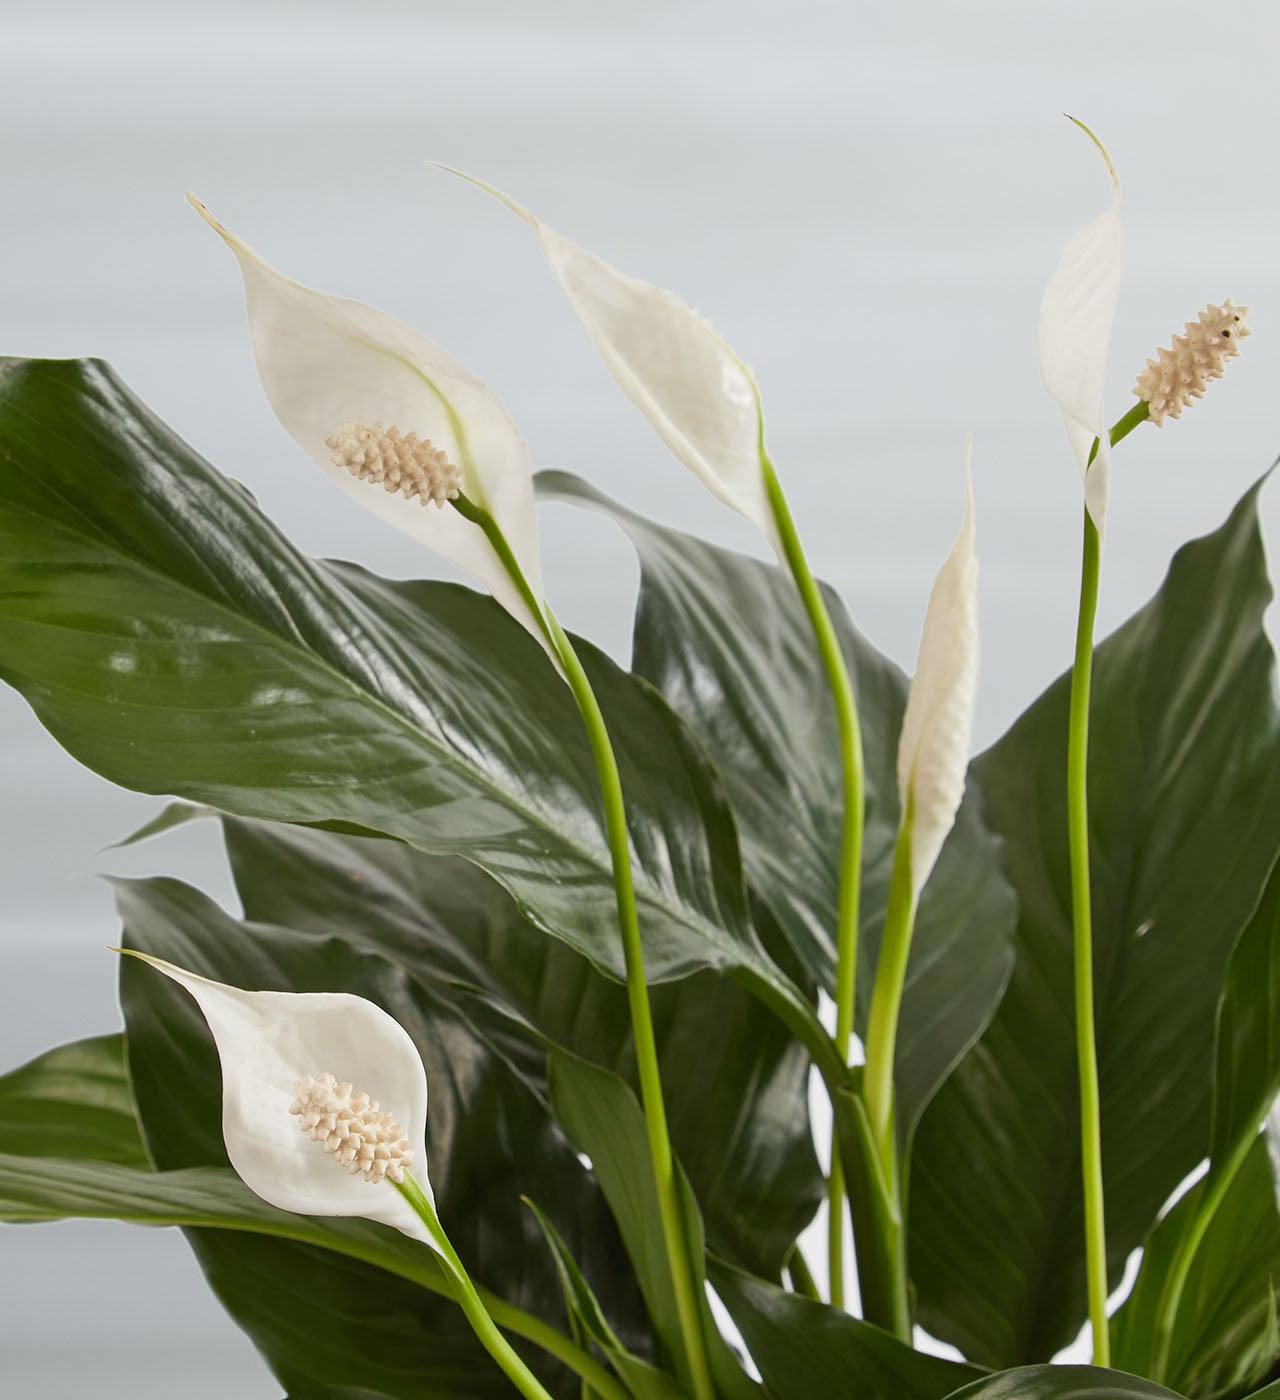 Blooming Memories Peace Lily Plant